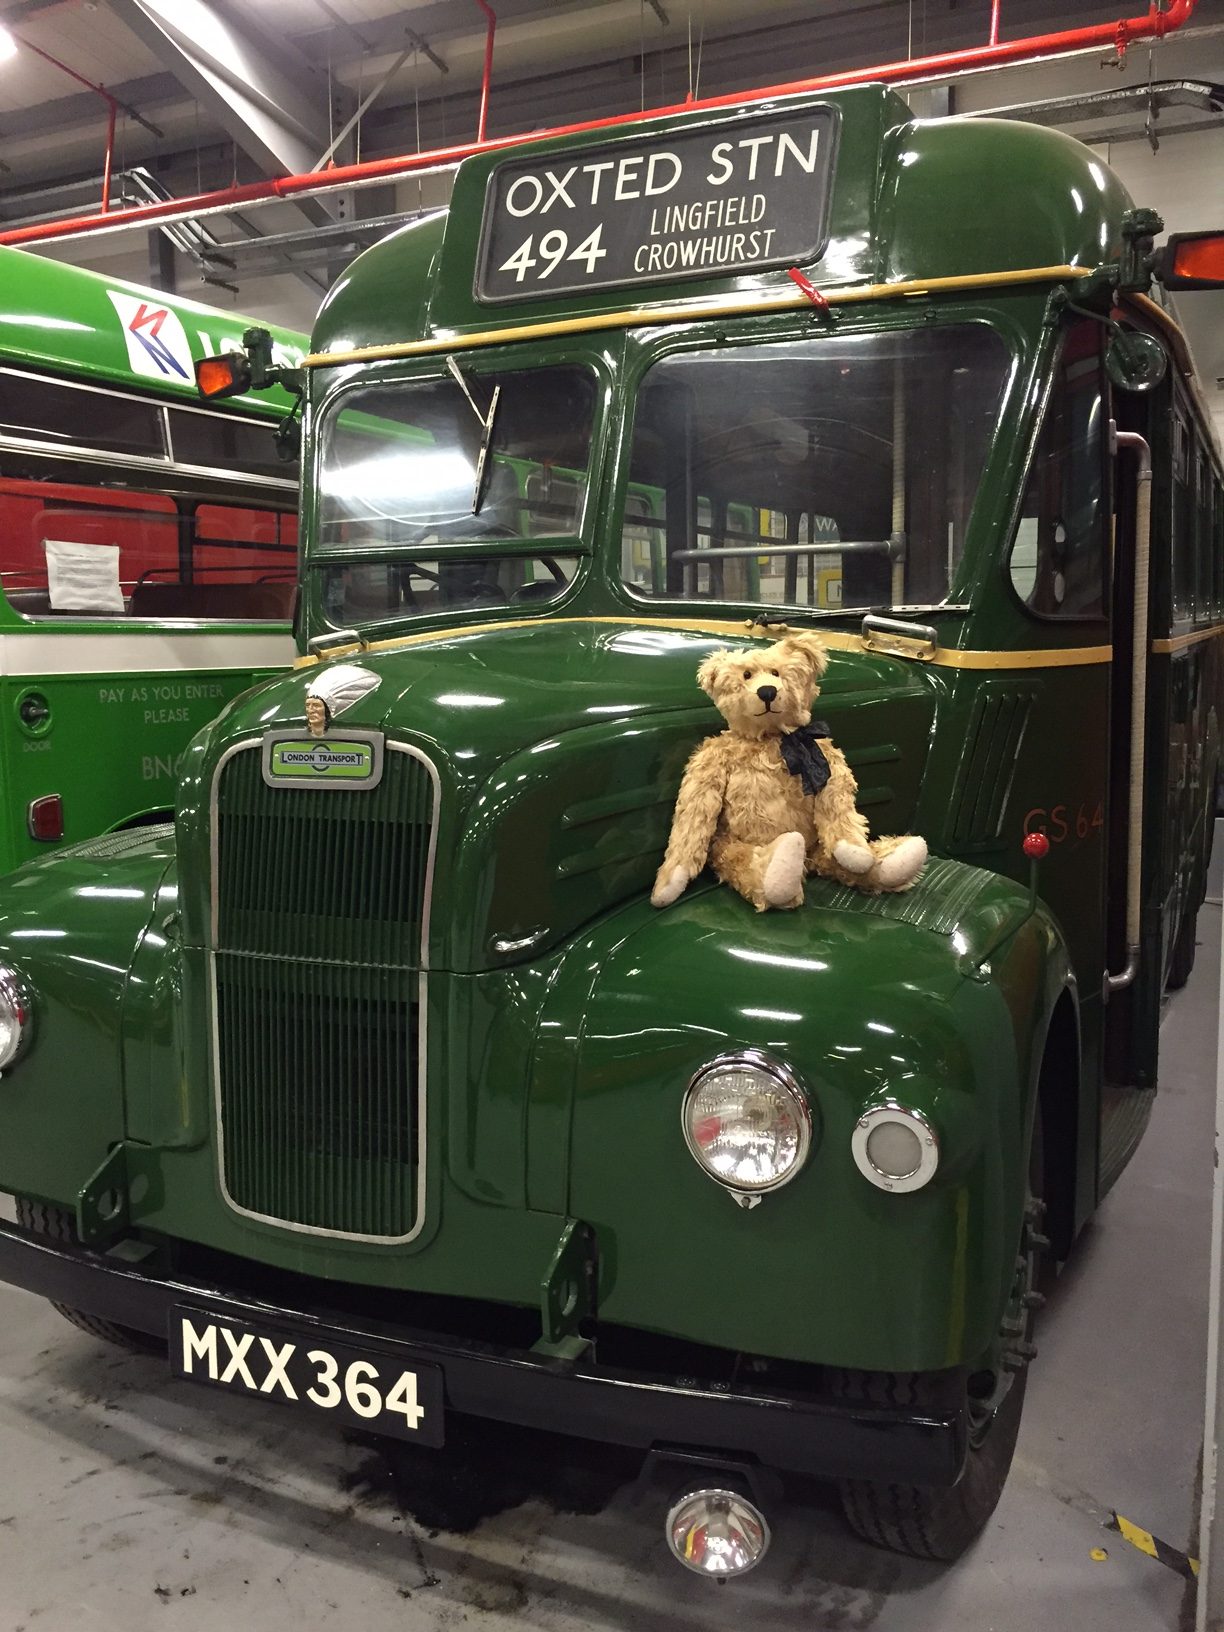 London Transport Museum: GS 64. A GS (Guy Special) country bus for rural routes. MXX 364.